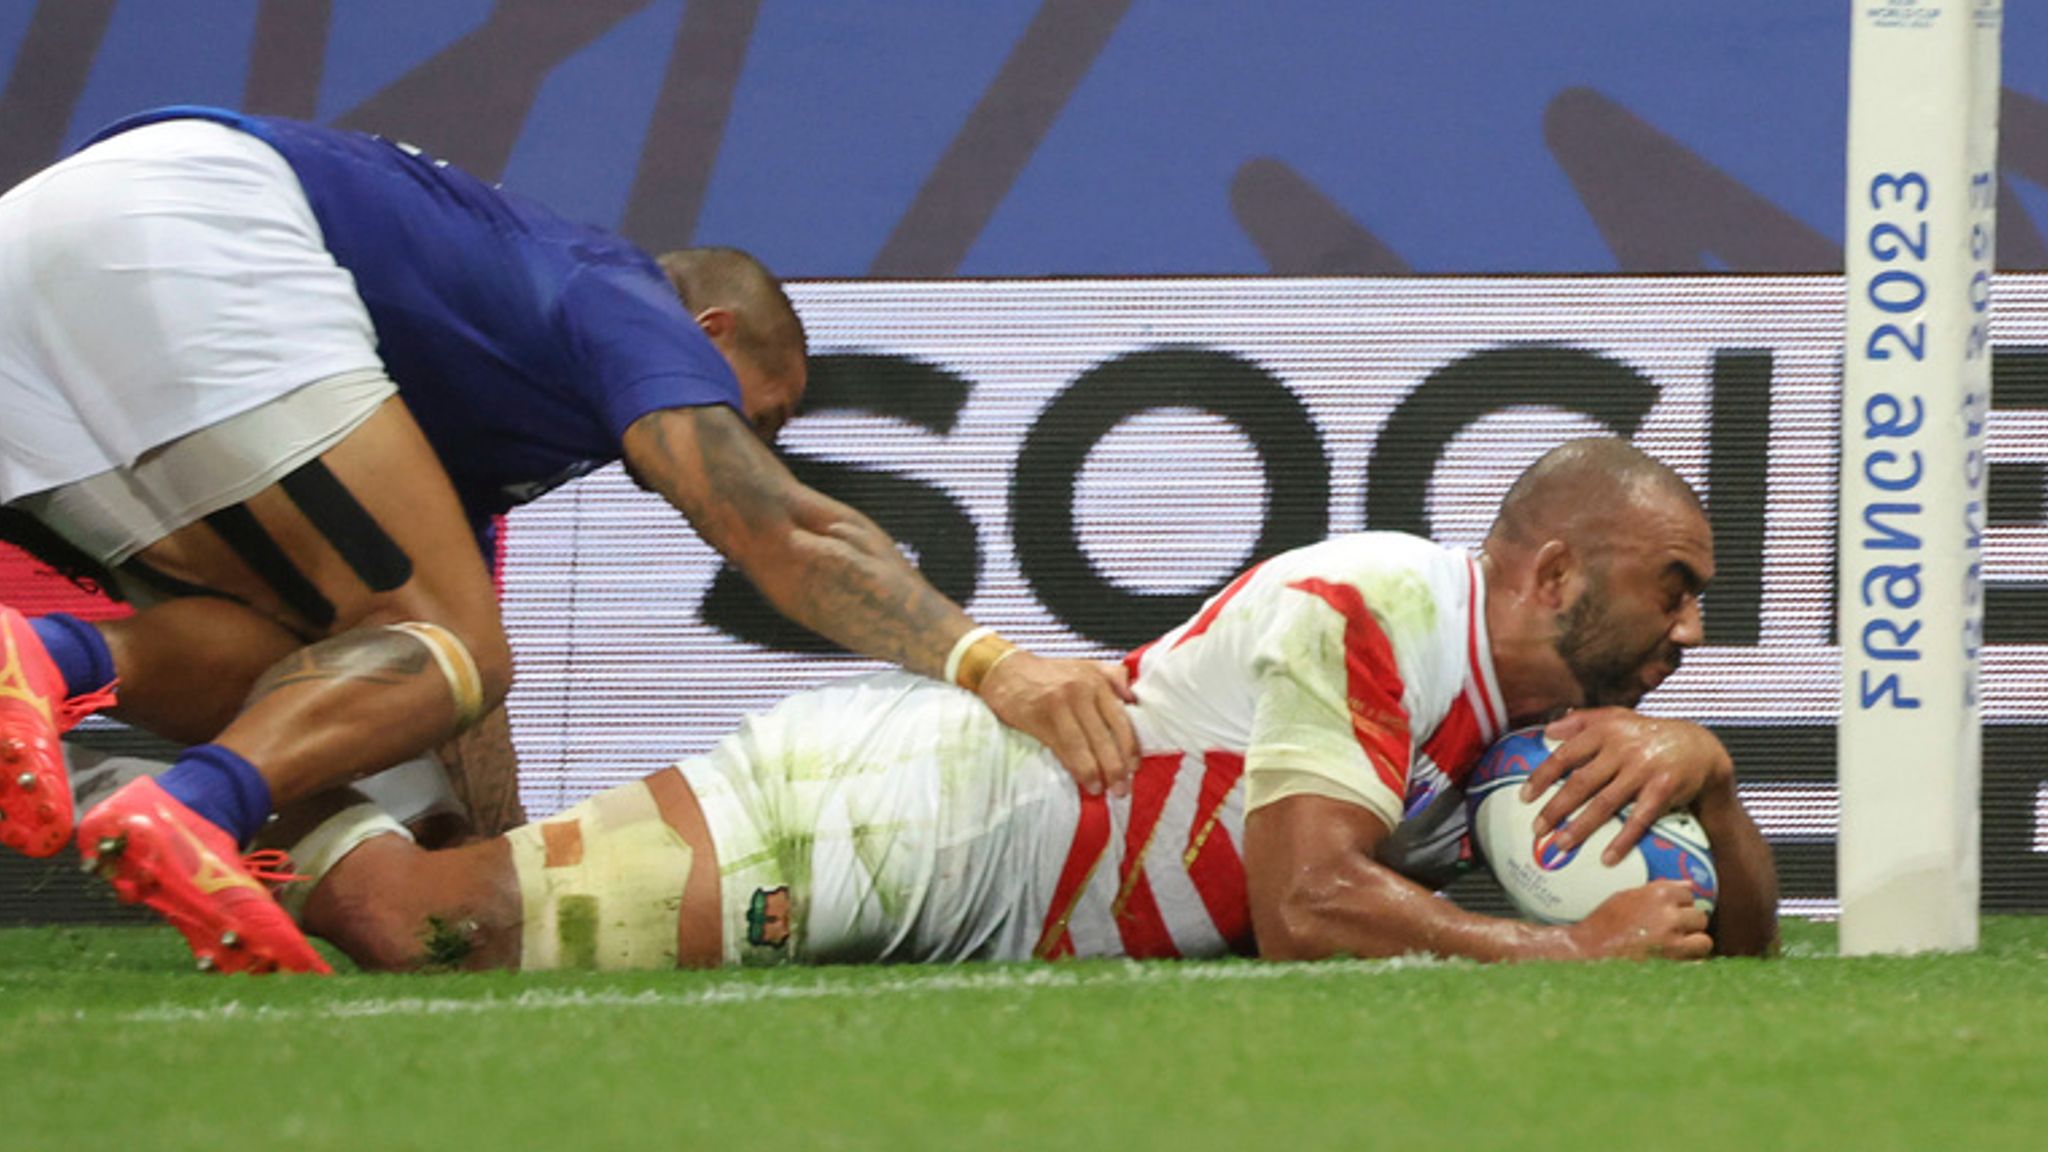 Rugby World Cup England secure quarter-final spot after Japan hold off Samoa in close 28-22 contest Rugby Union News Sky Sports